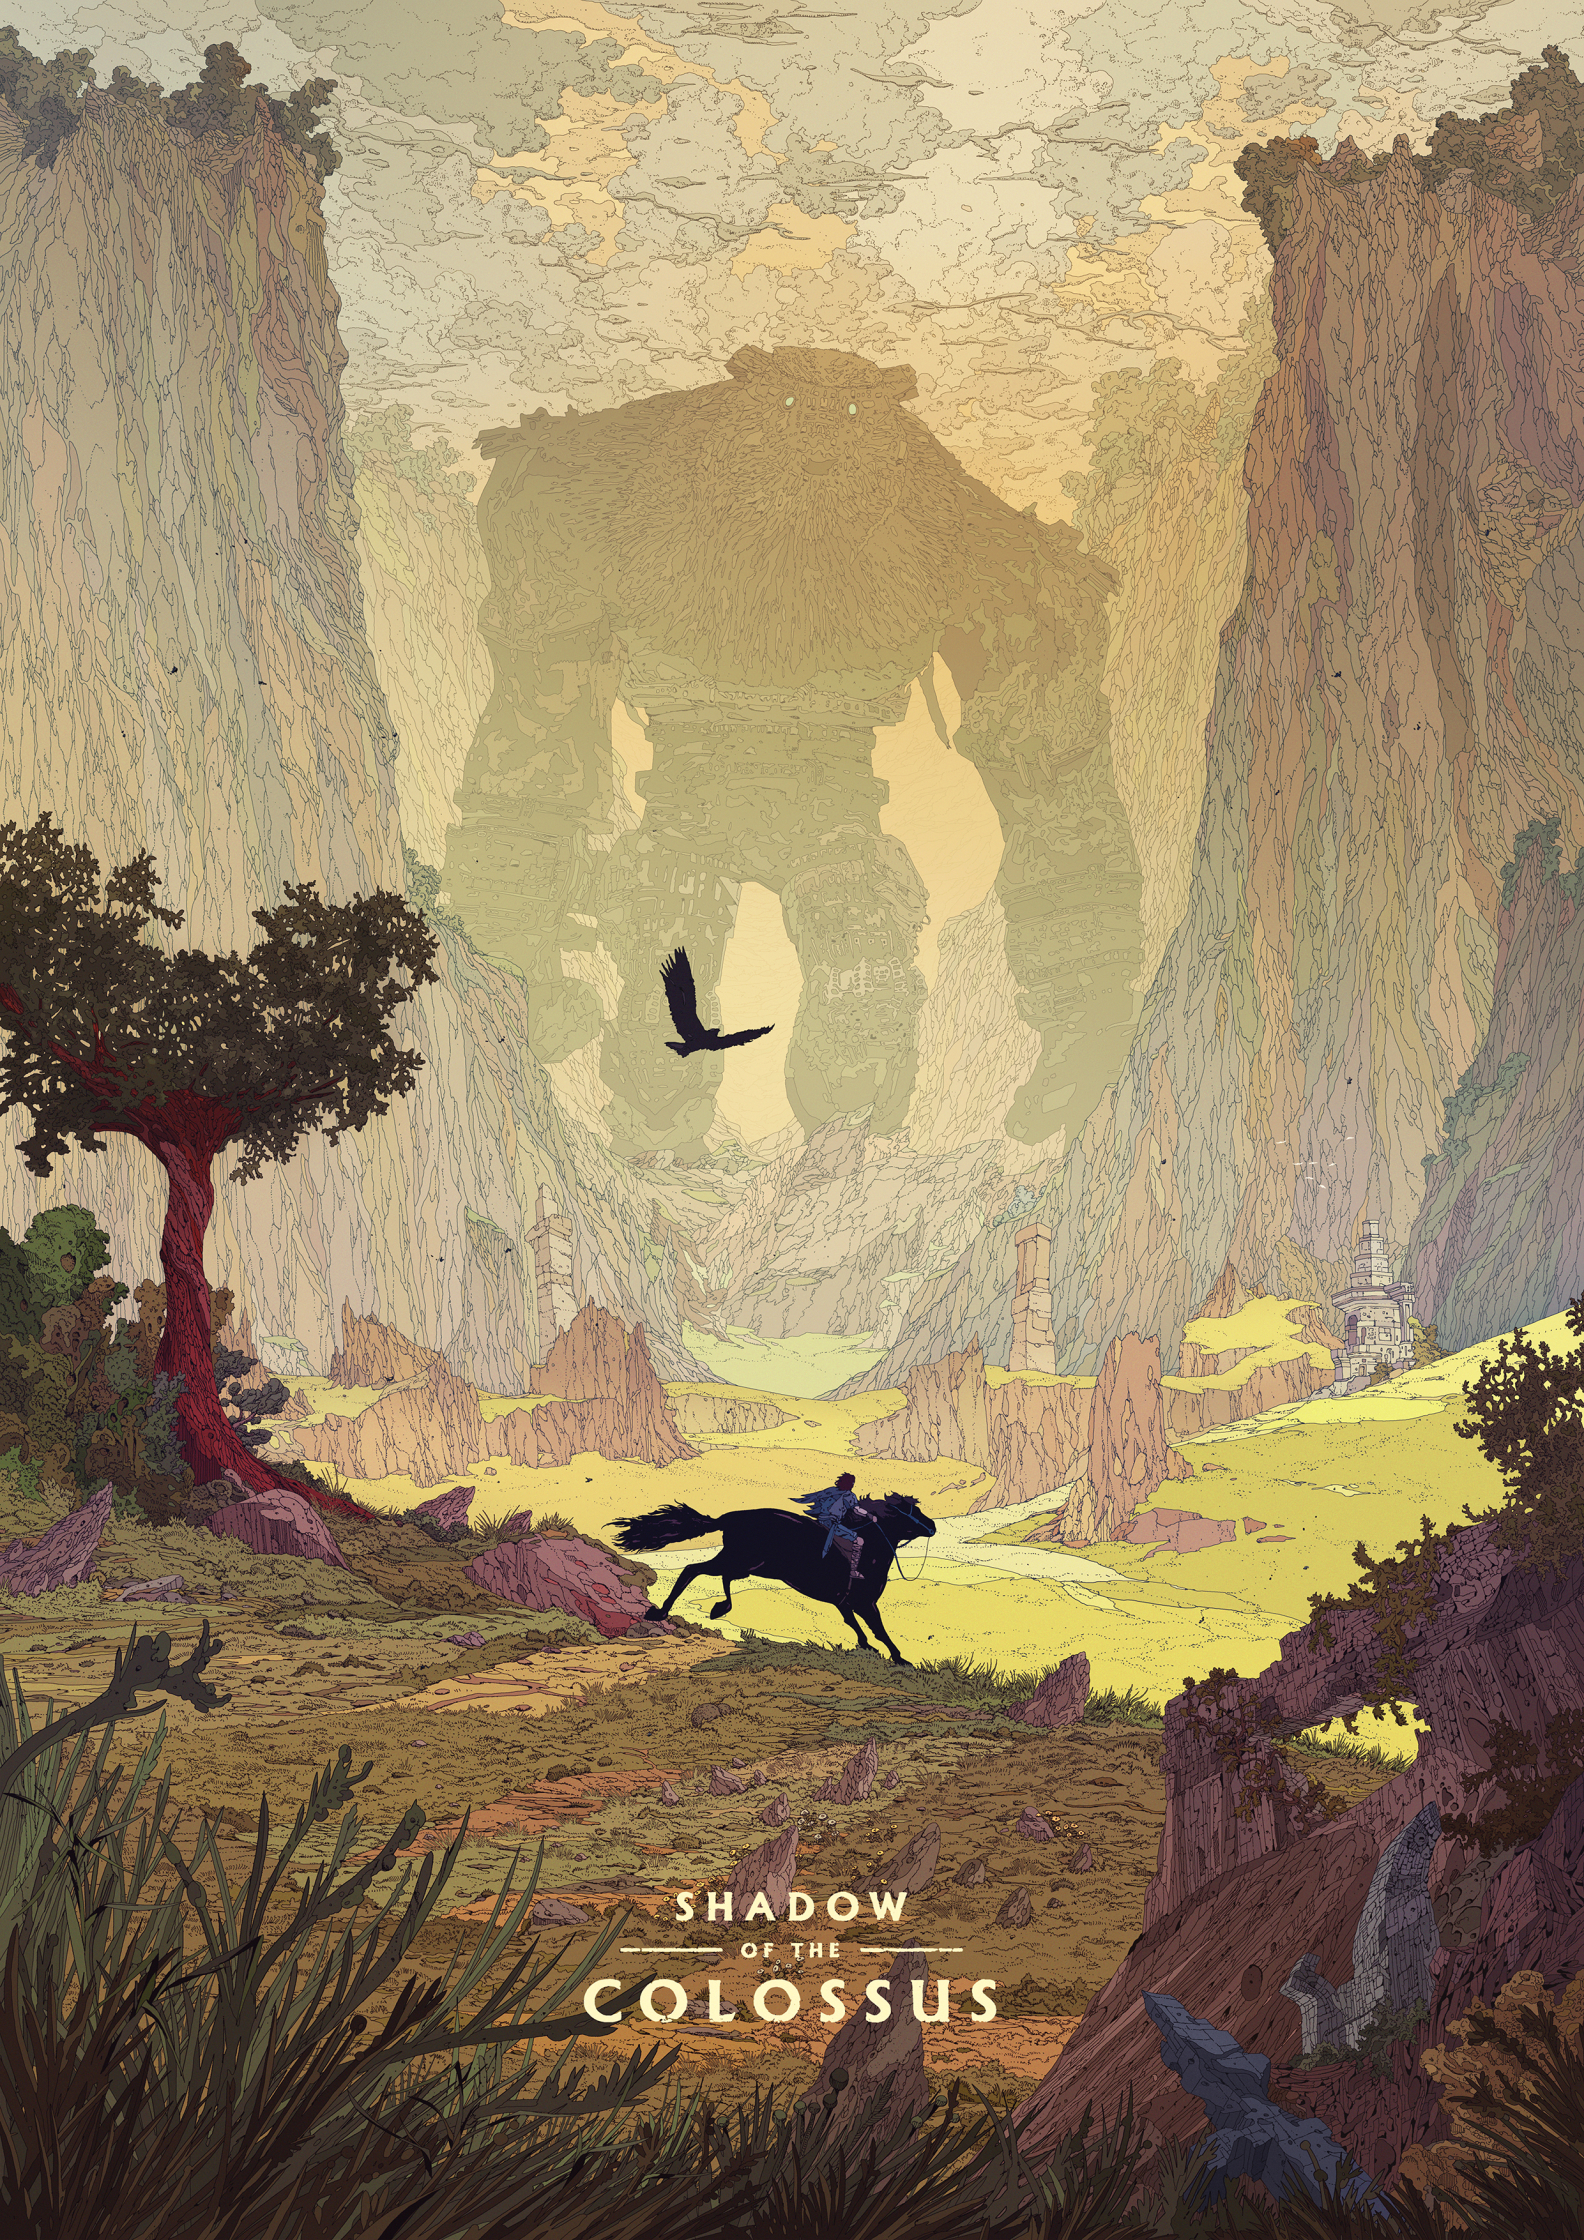 Shadow of the colossus poster commission for Cook&becker and Sony Japan.jpg